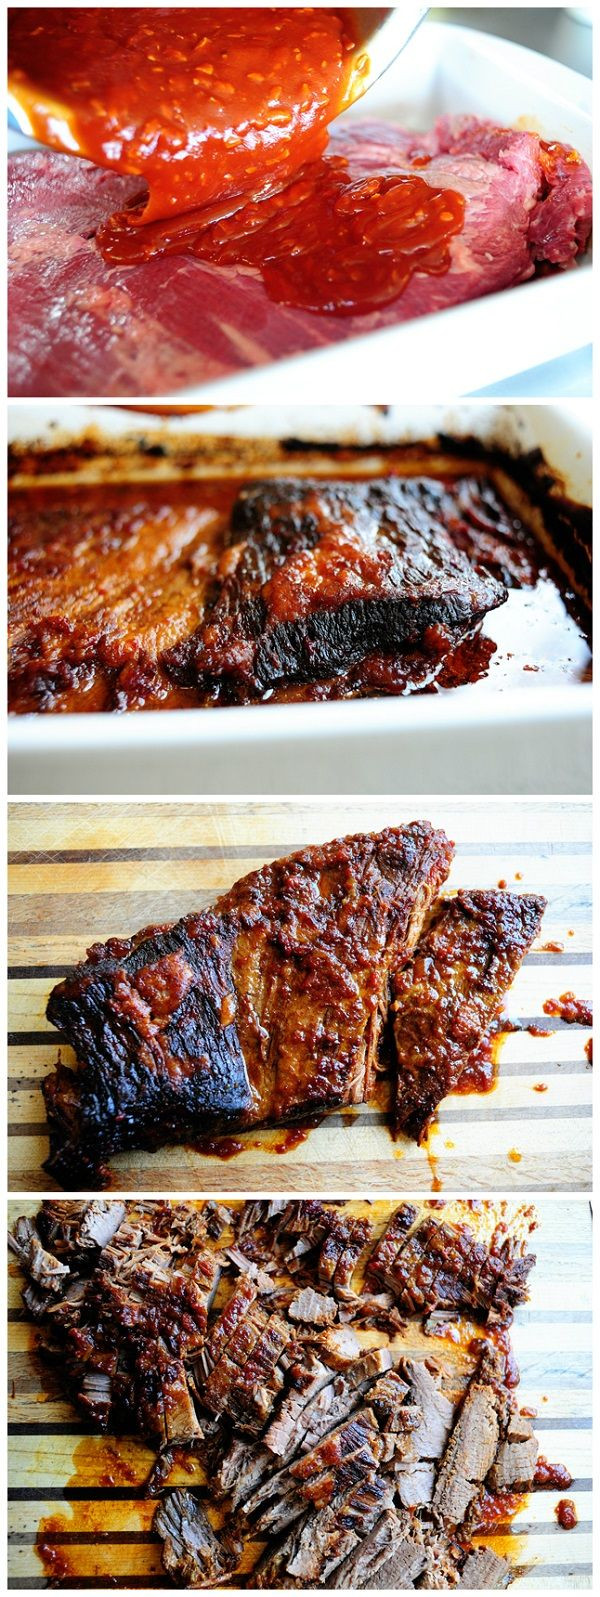 Passover Brisket Recipe Oven
 260 best Passover images on Pinterest